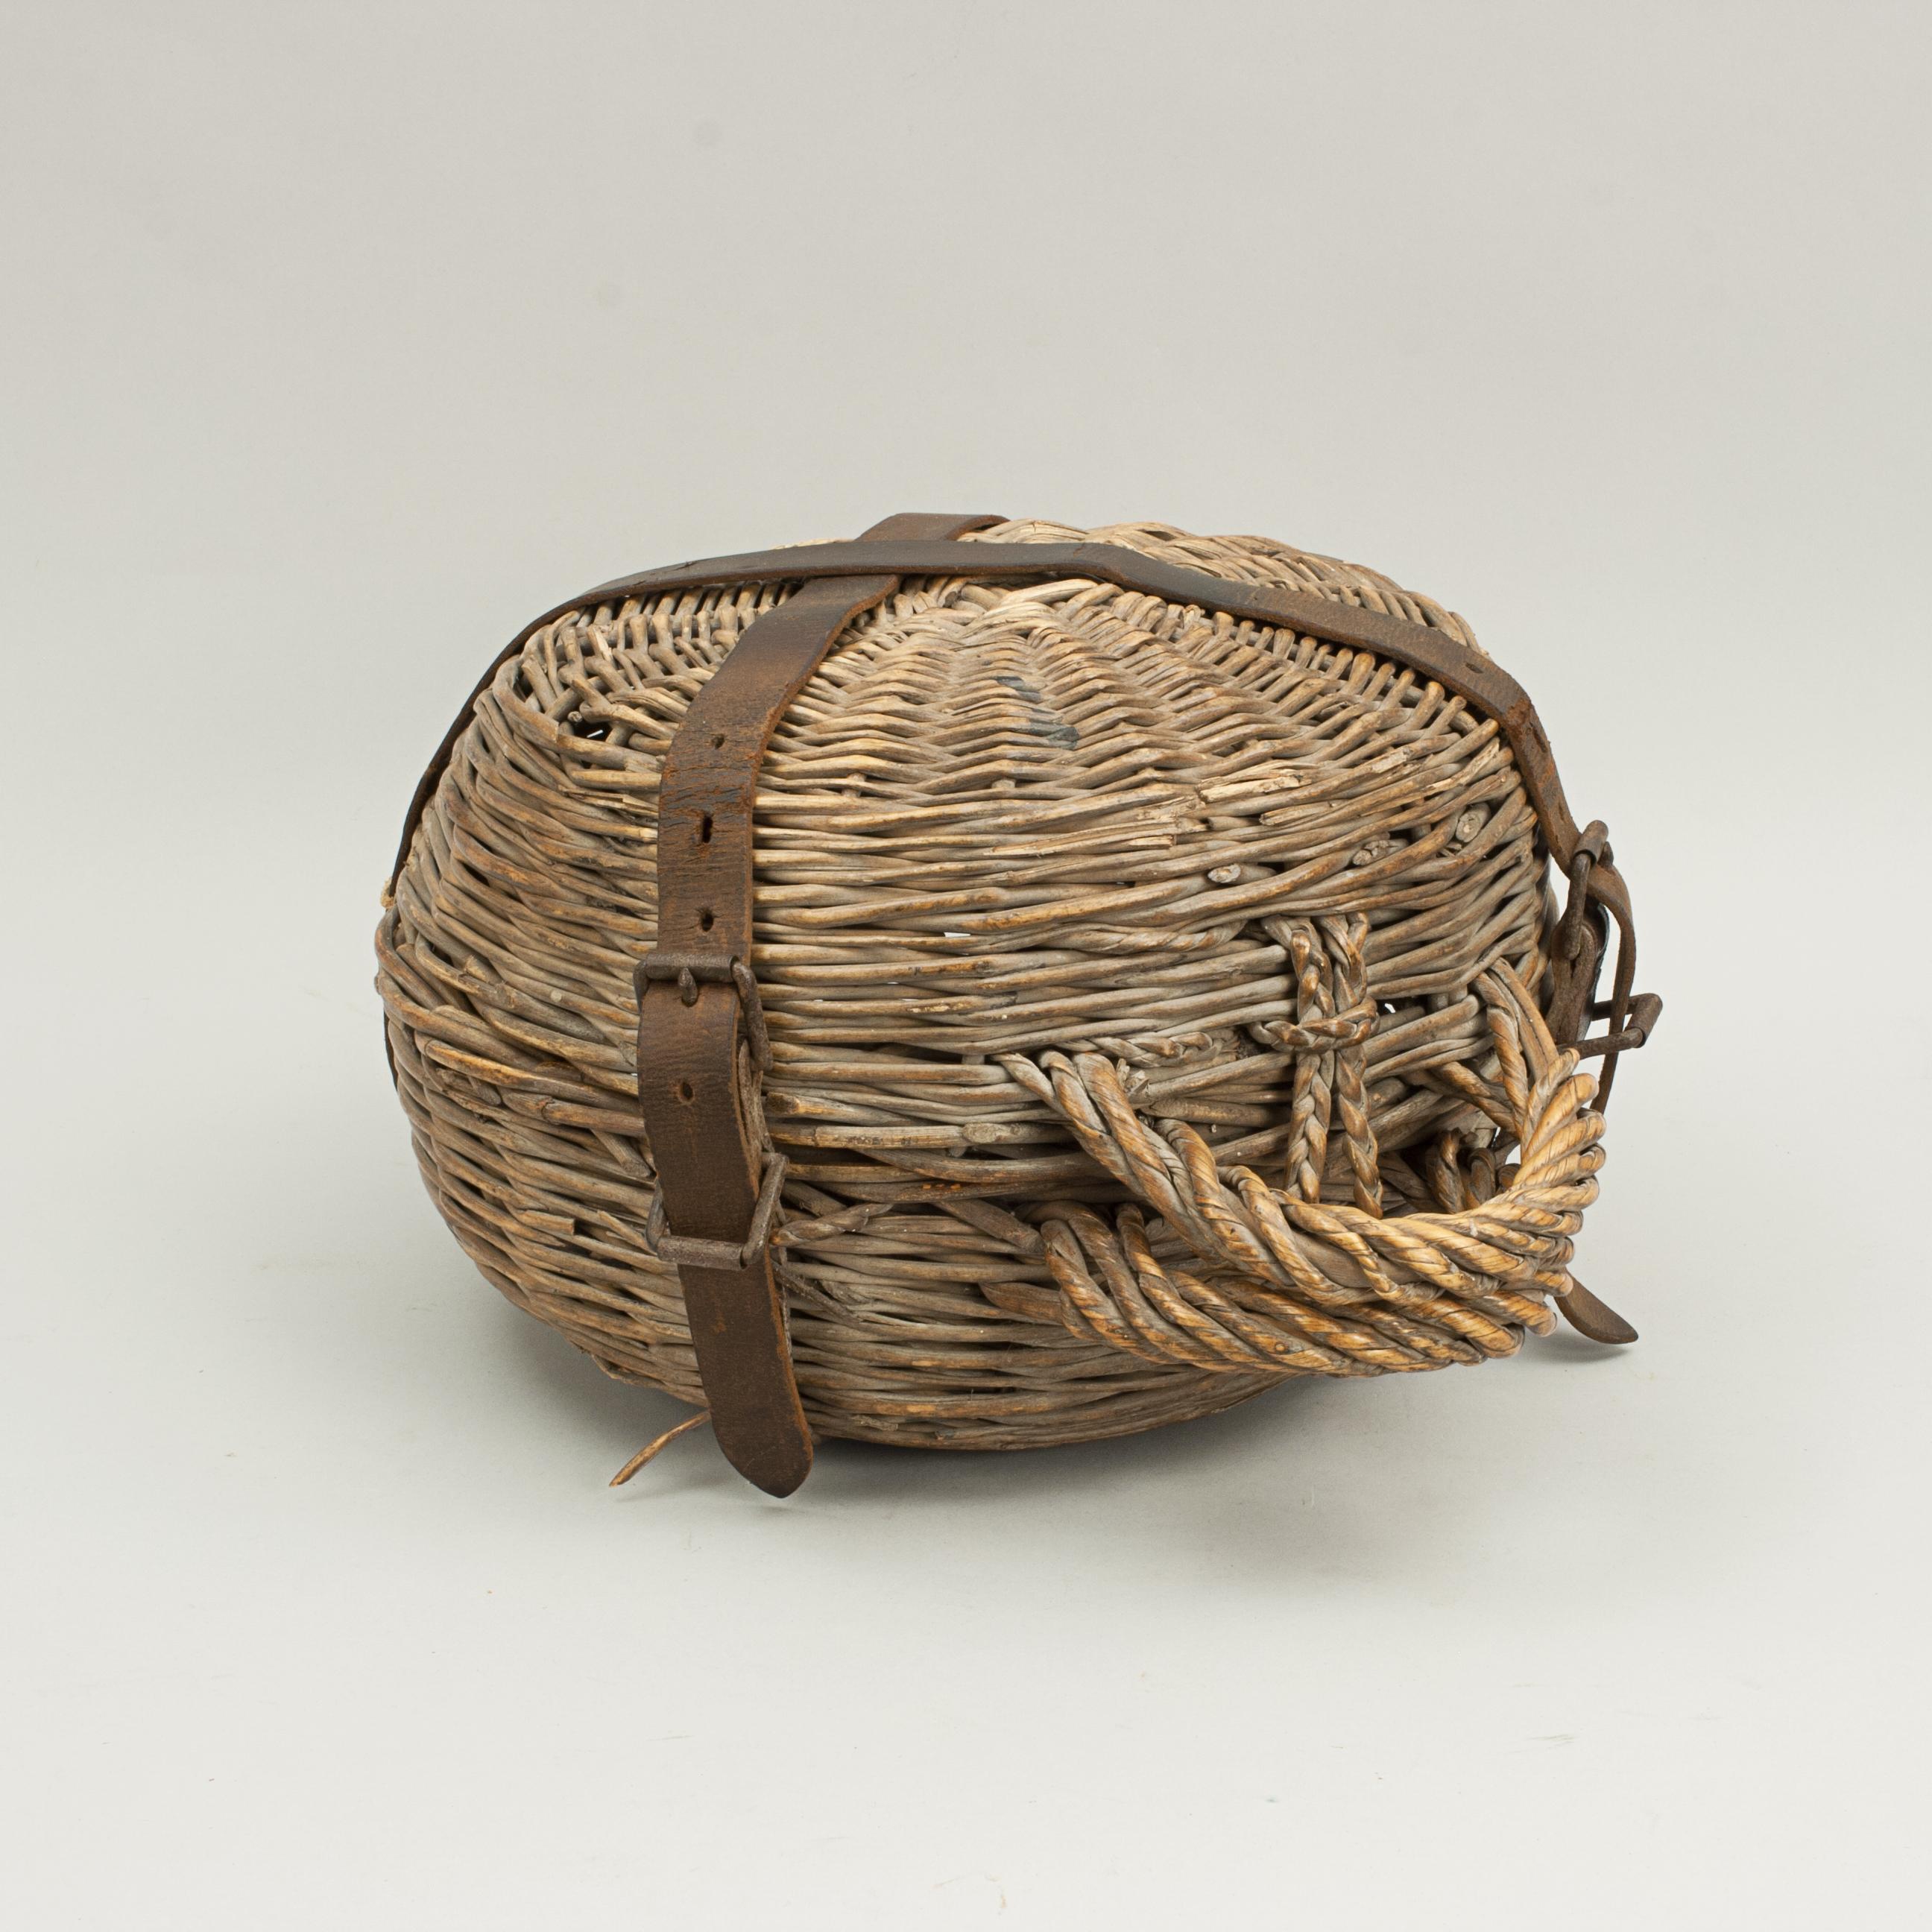 Curling stone with wicker case.
A late 19th or early 20th century double - soled, machine - made curling stone, rare to find with original wicker carry case. The wicker 'container' was used to protect and carry the curling stone, the handle would